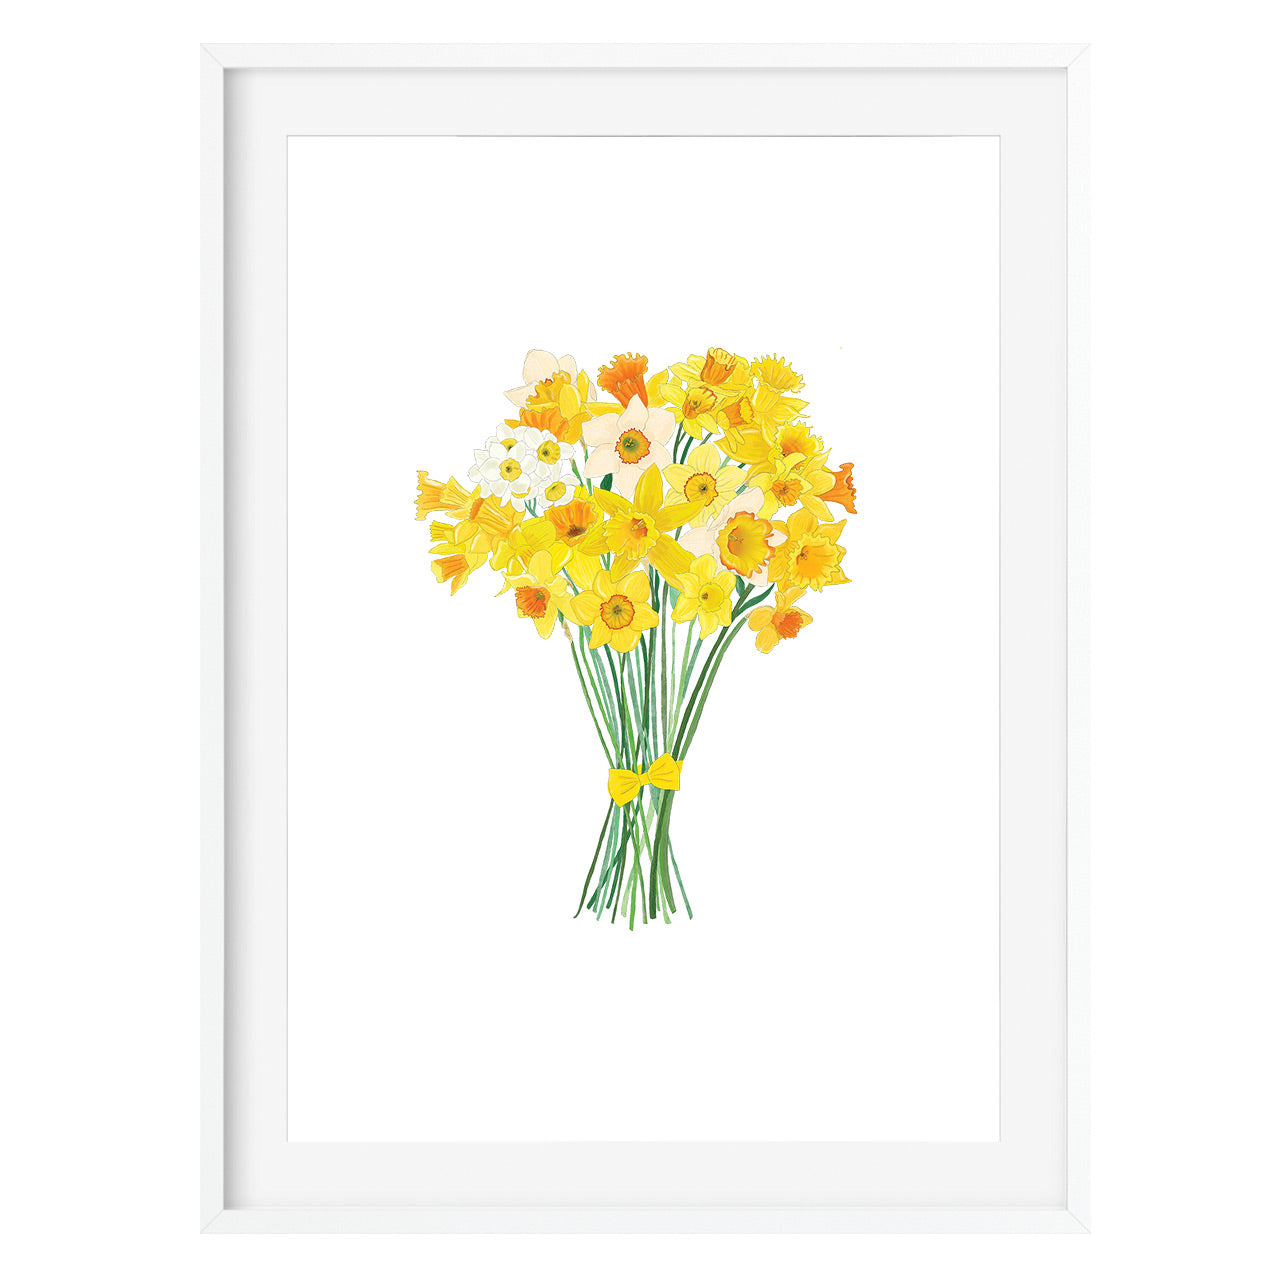 Daffodils Floral Art Print - Poppins & Co.